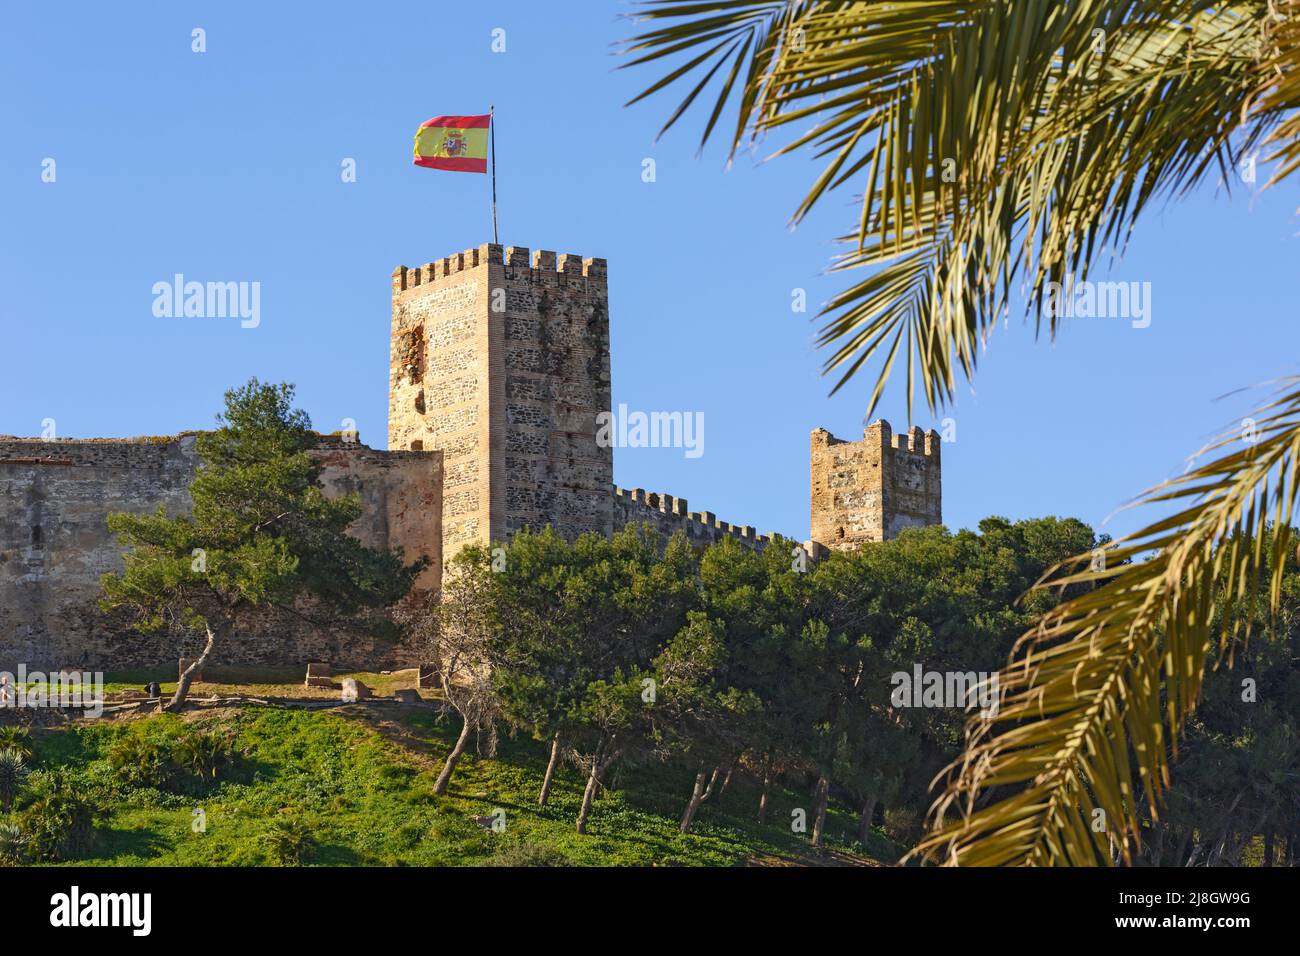 Sohail castle., Fuengirola, Costa del Sol, Malaga Province, Andalusia, southern Spain.  The Moorish castle was built in the 10th century.  Amongst man Stock Photo